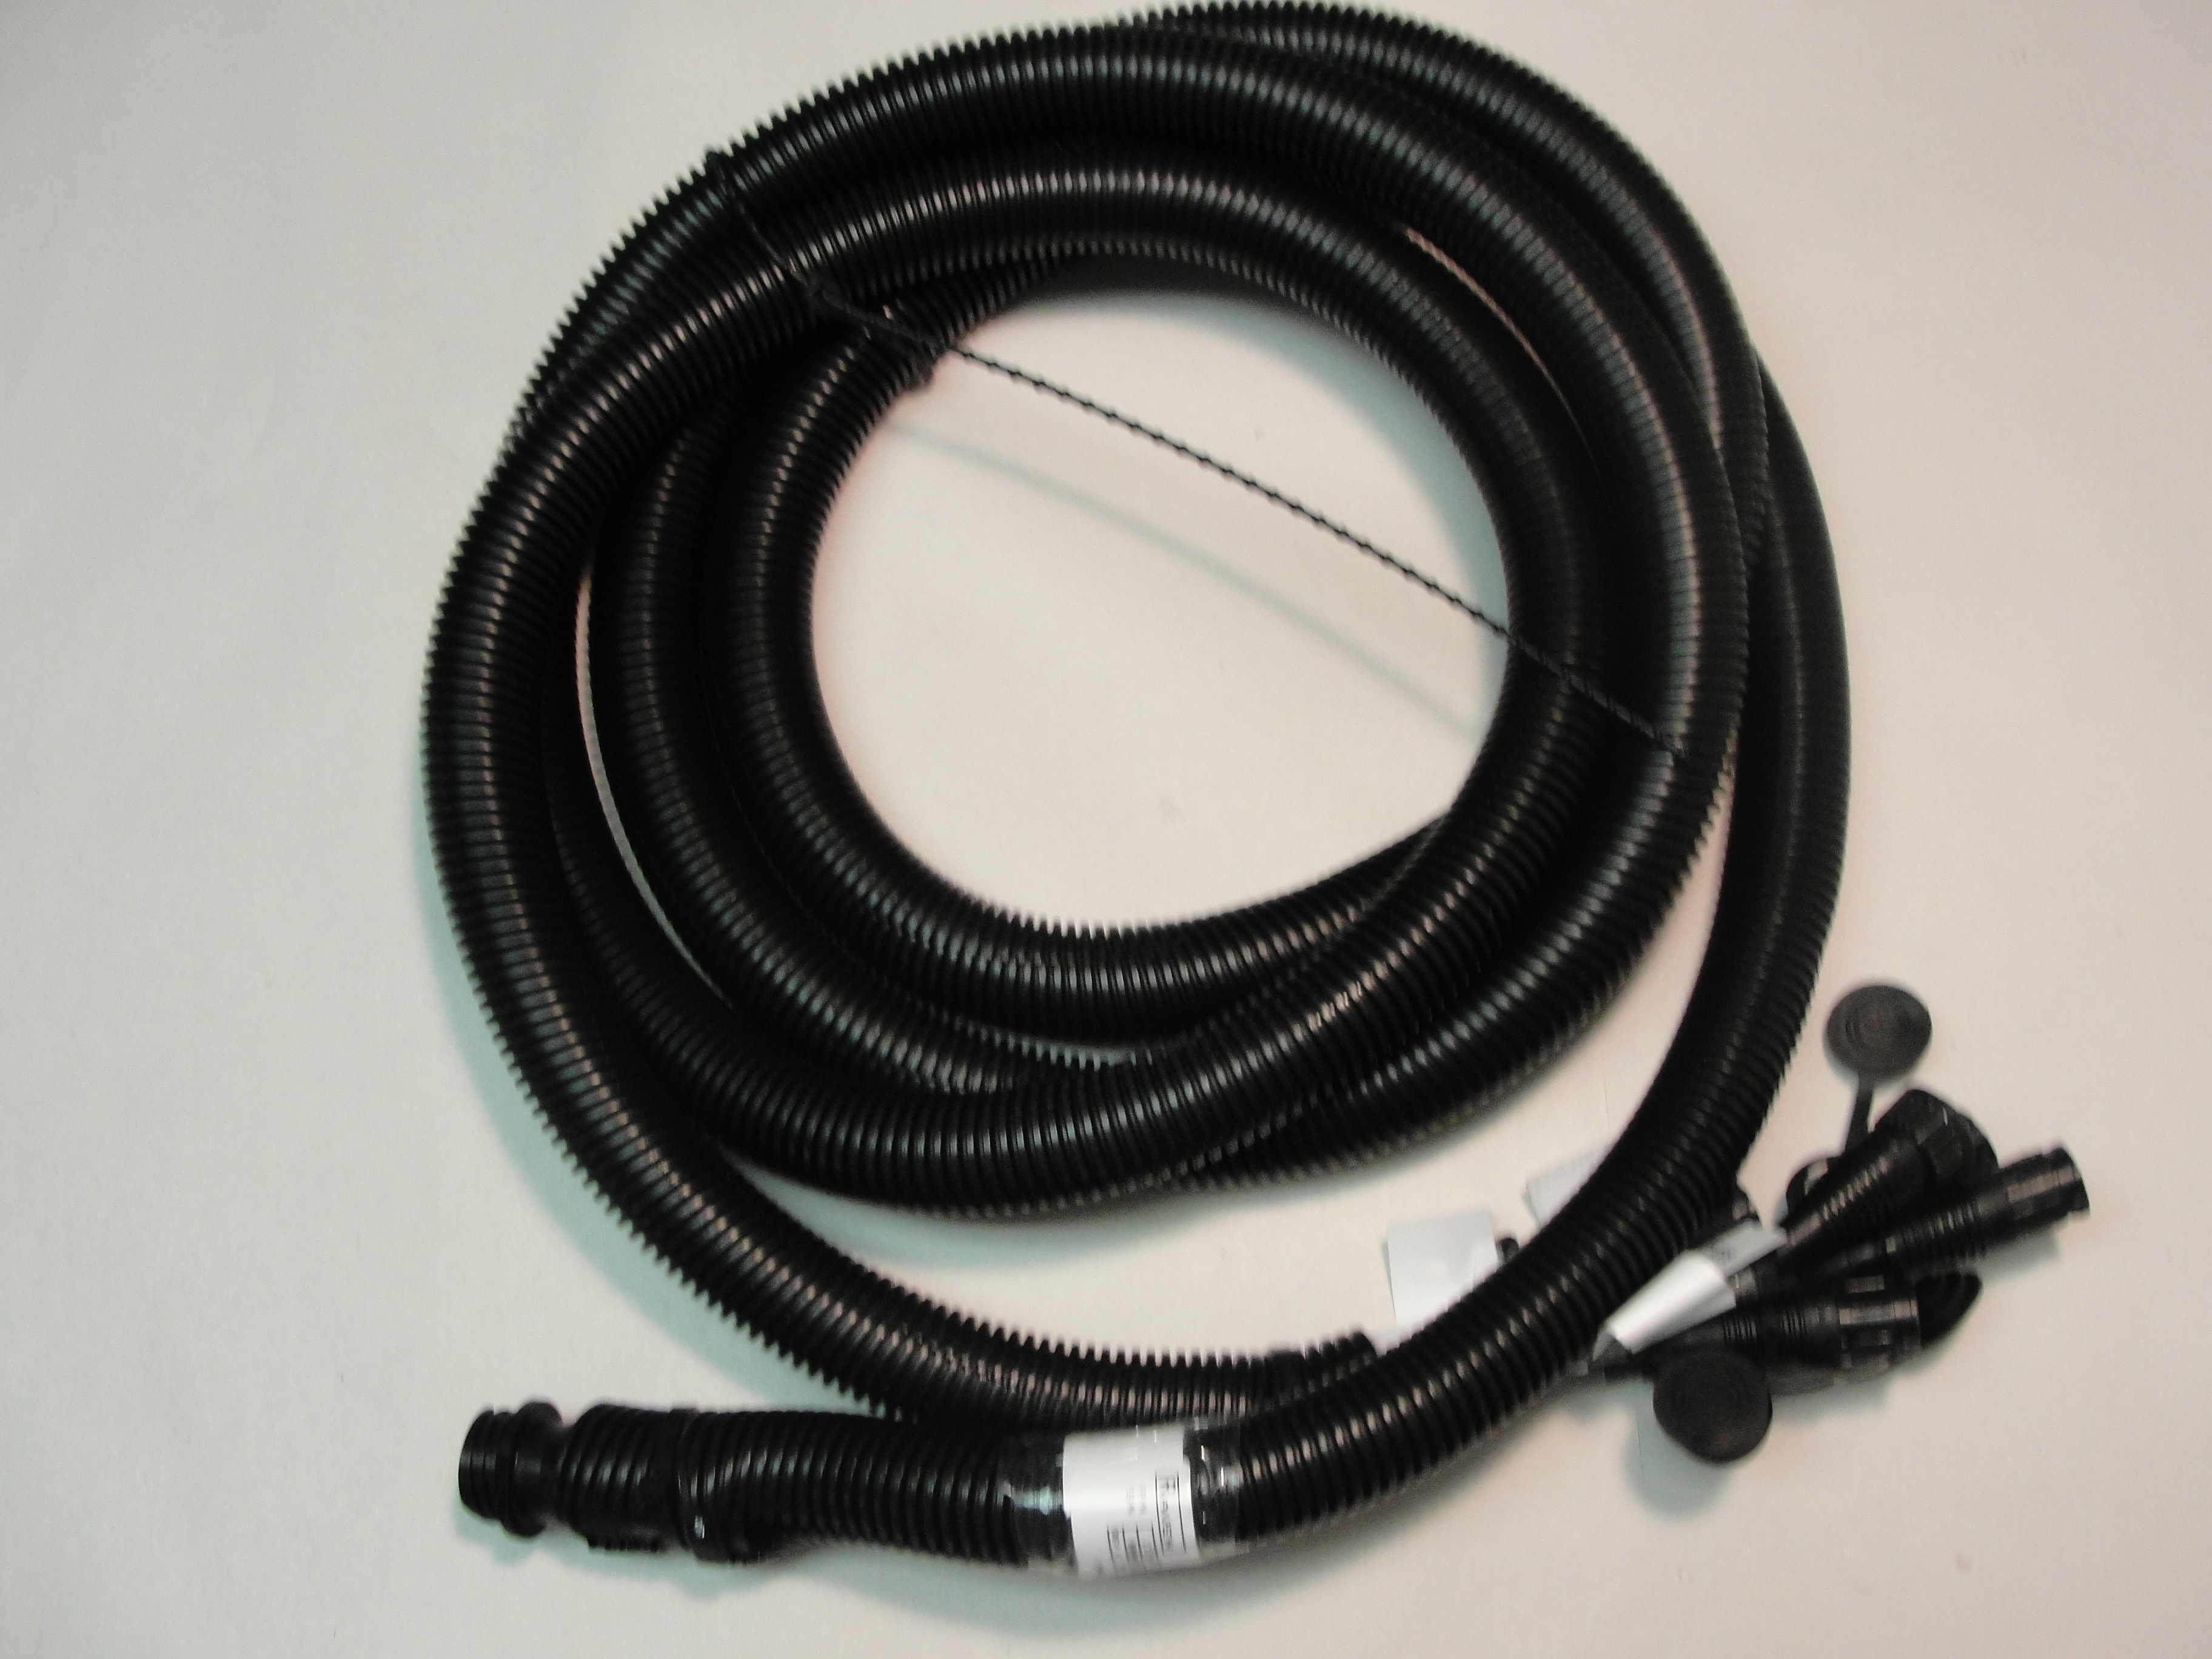 115-0171-800 Raven Cable 12' Product NH3 Single Section